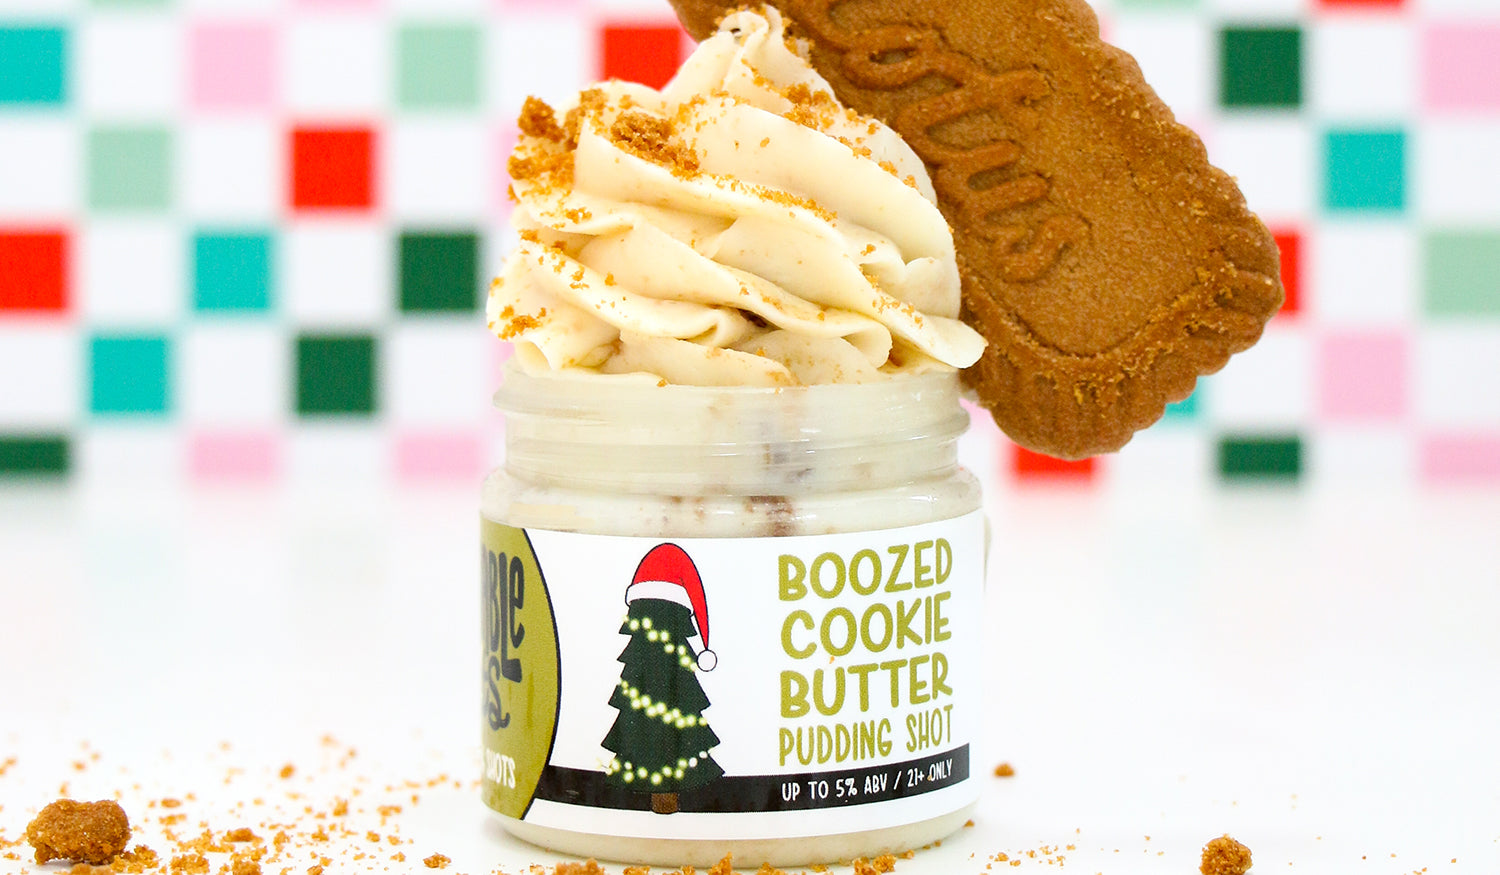 Boozed Cookie Butter Pudding Shot